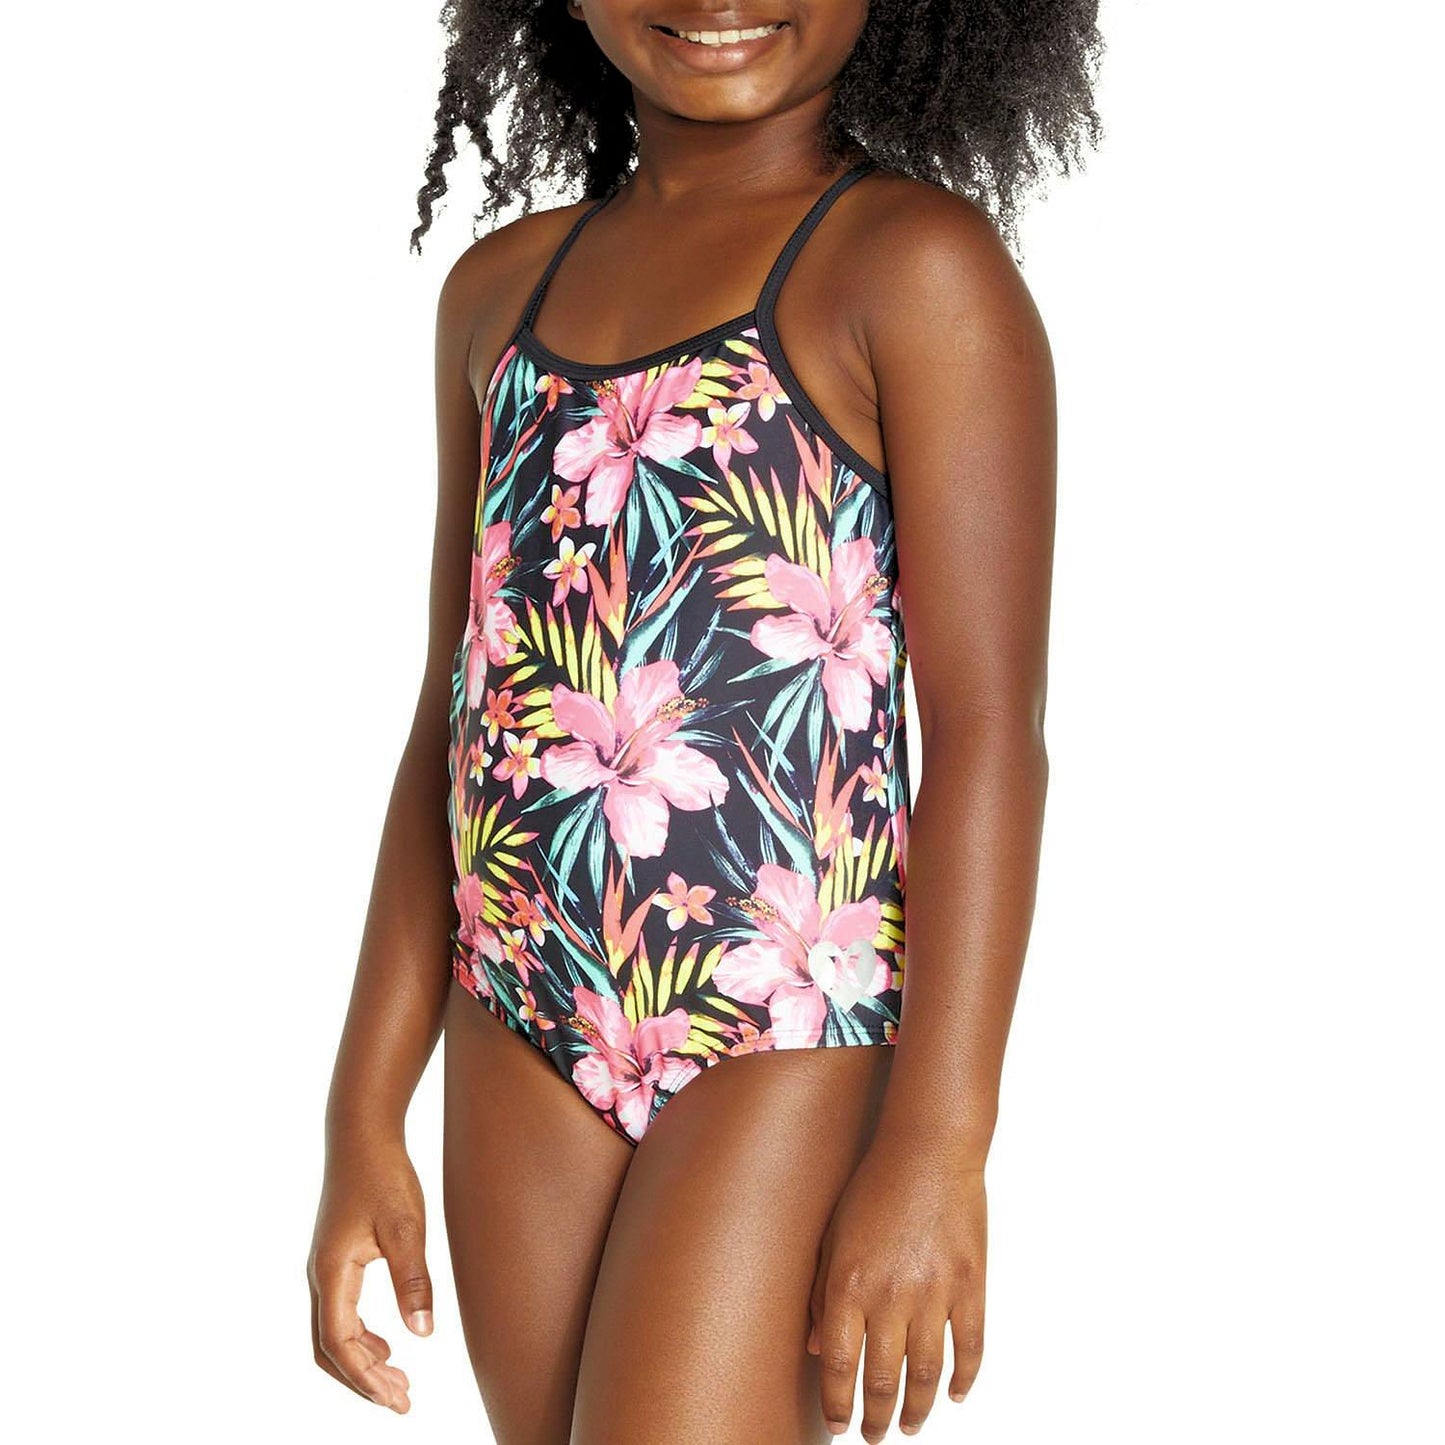 Hurley Girl's UPF 50+ One-Piece Quick Dry Swimsuit